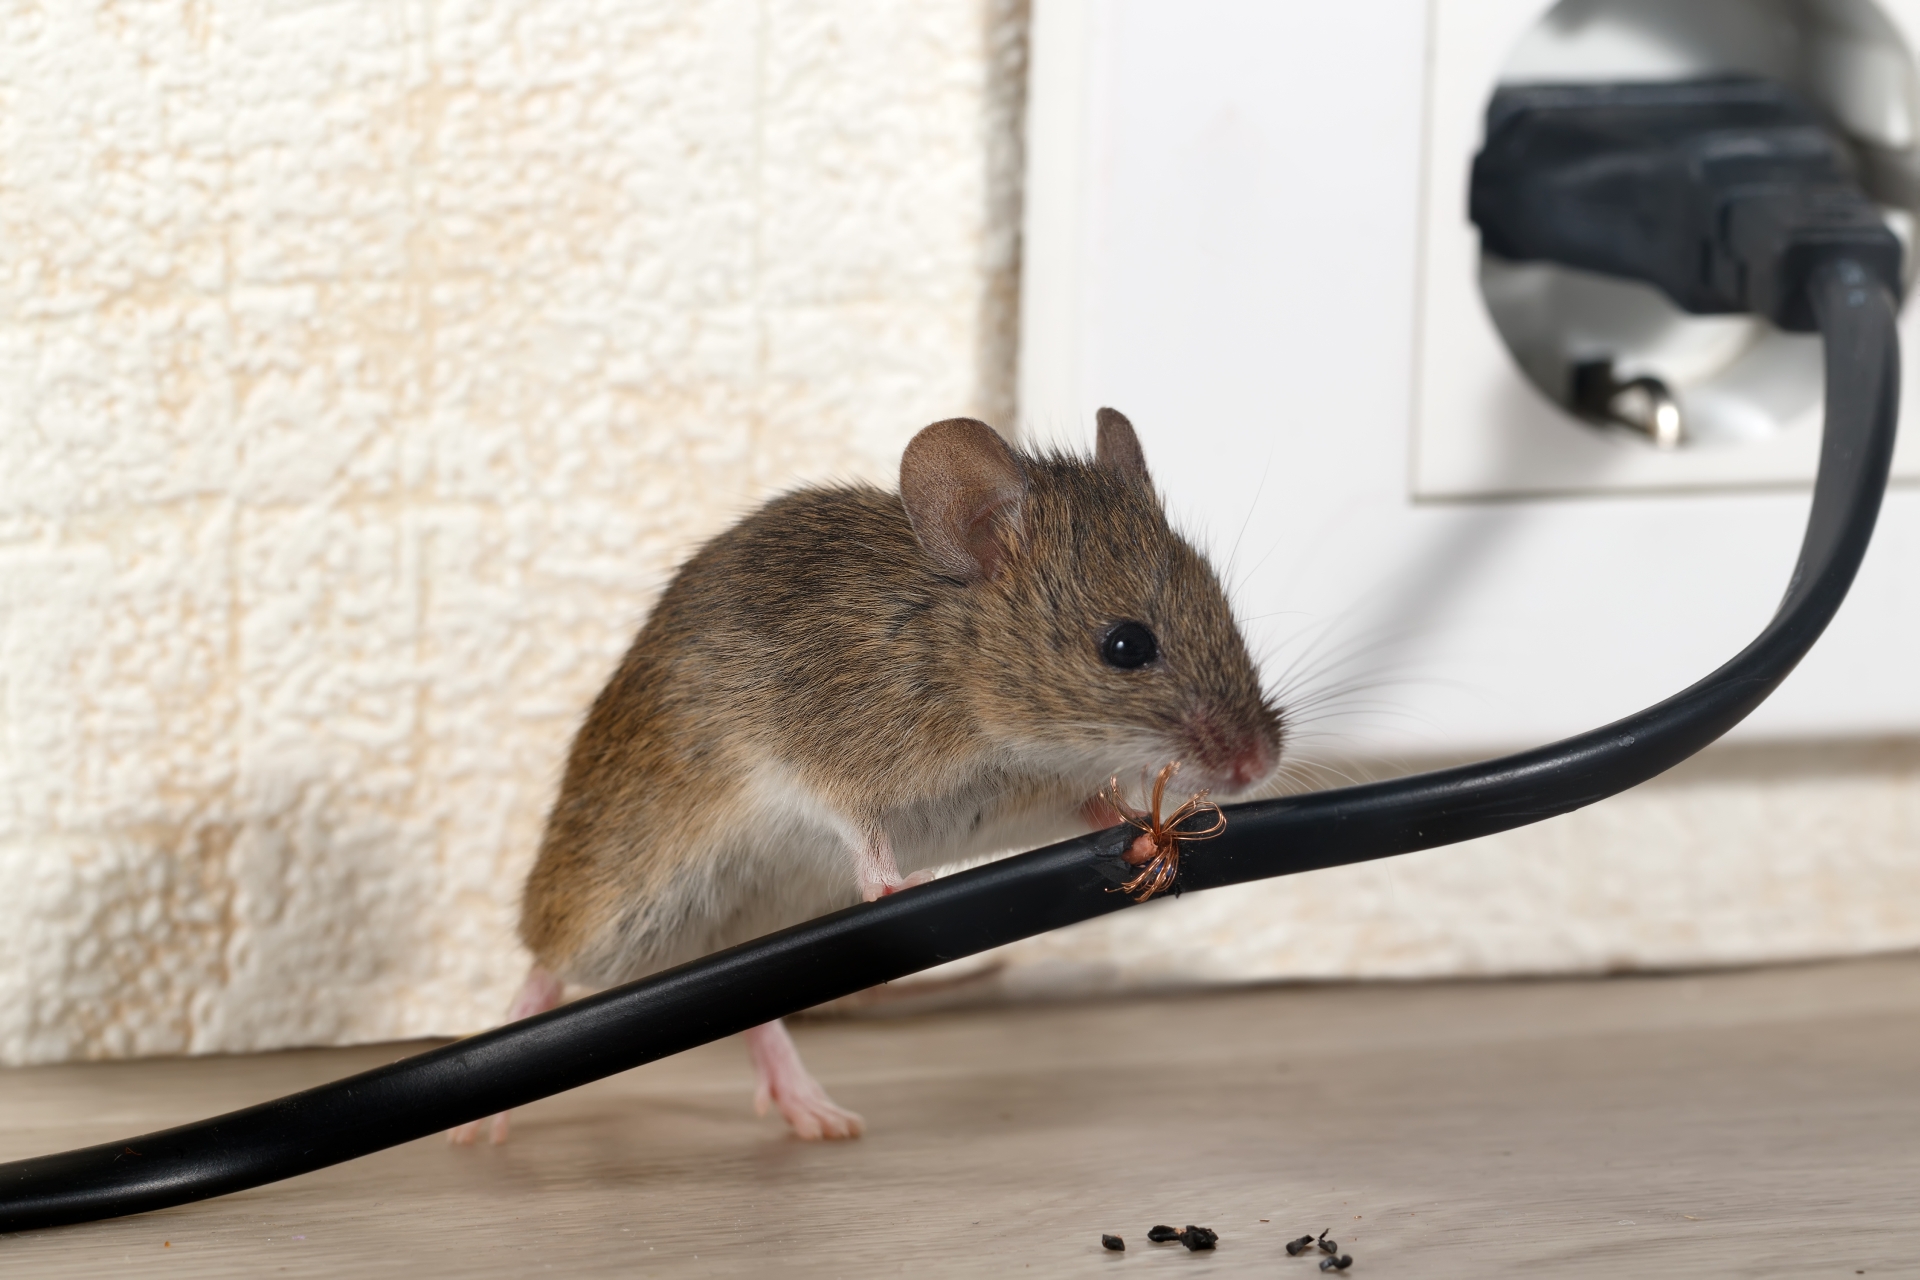 Mice Infestation, Pest Control in Nine Elms, SW8. Call Now 020 8166 9746